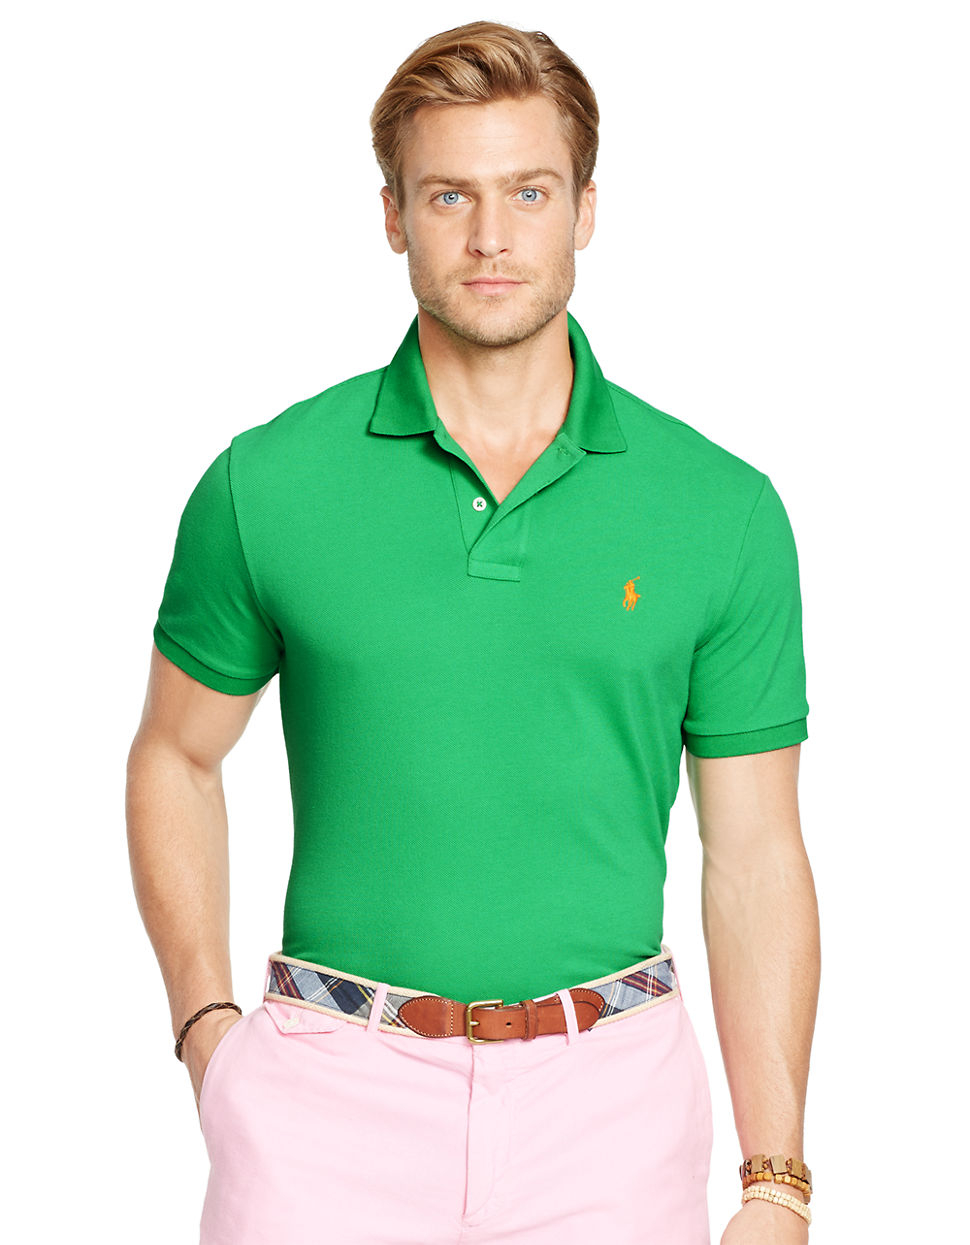 Lyst - Polo Ralph Lauren Classic-Fit Mesh Polo Shirt in Green for Men